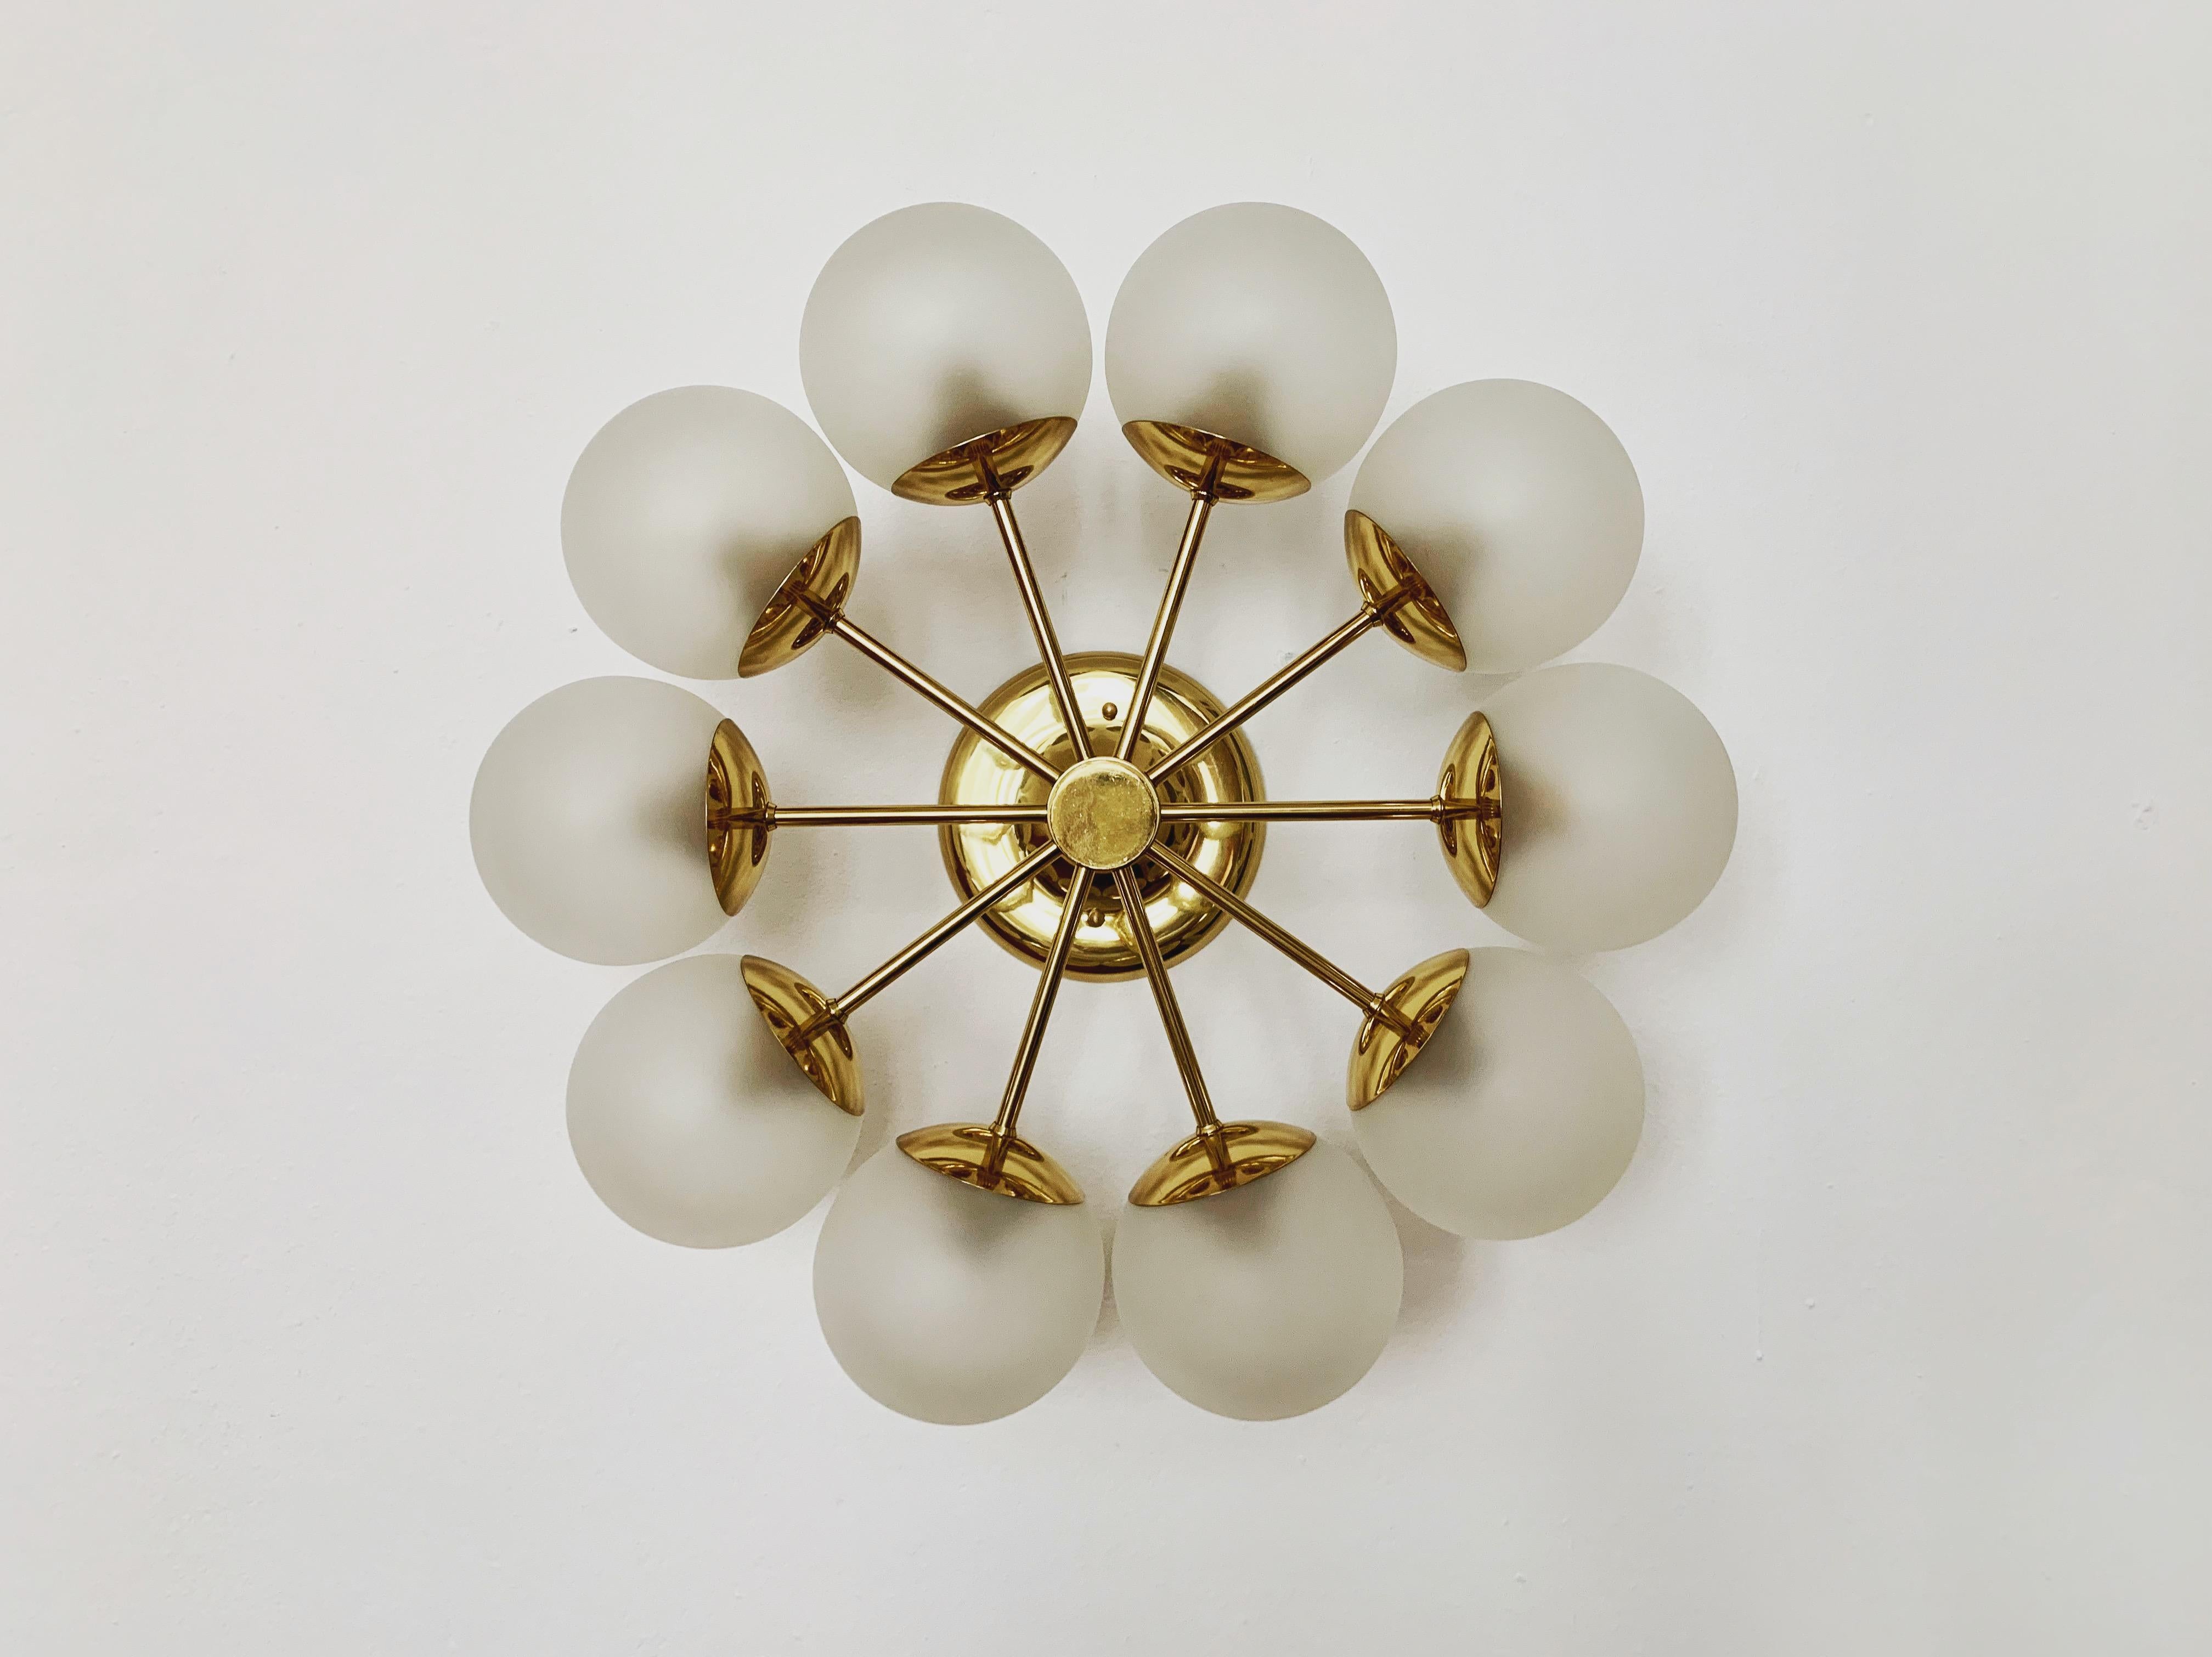 Extremely beautiful and large German Sputnik chandelier from the 1960s.
The 10 etched lampshades spread a pleasant light.
The lamp has a very high quality finish.
Very contemporary design with a fantastic noble appearance.

Manufacturer: Kaiser